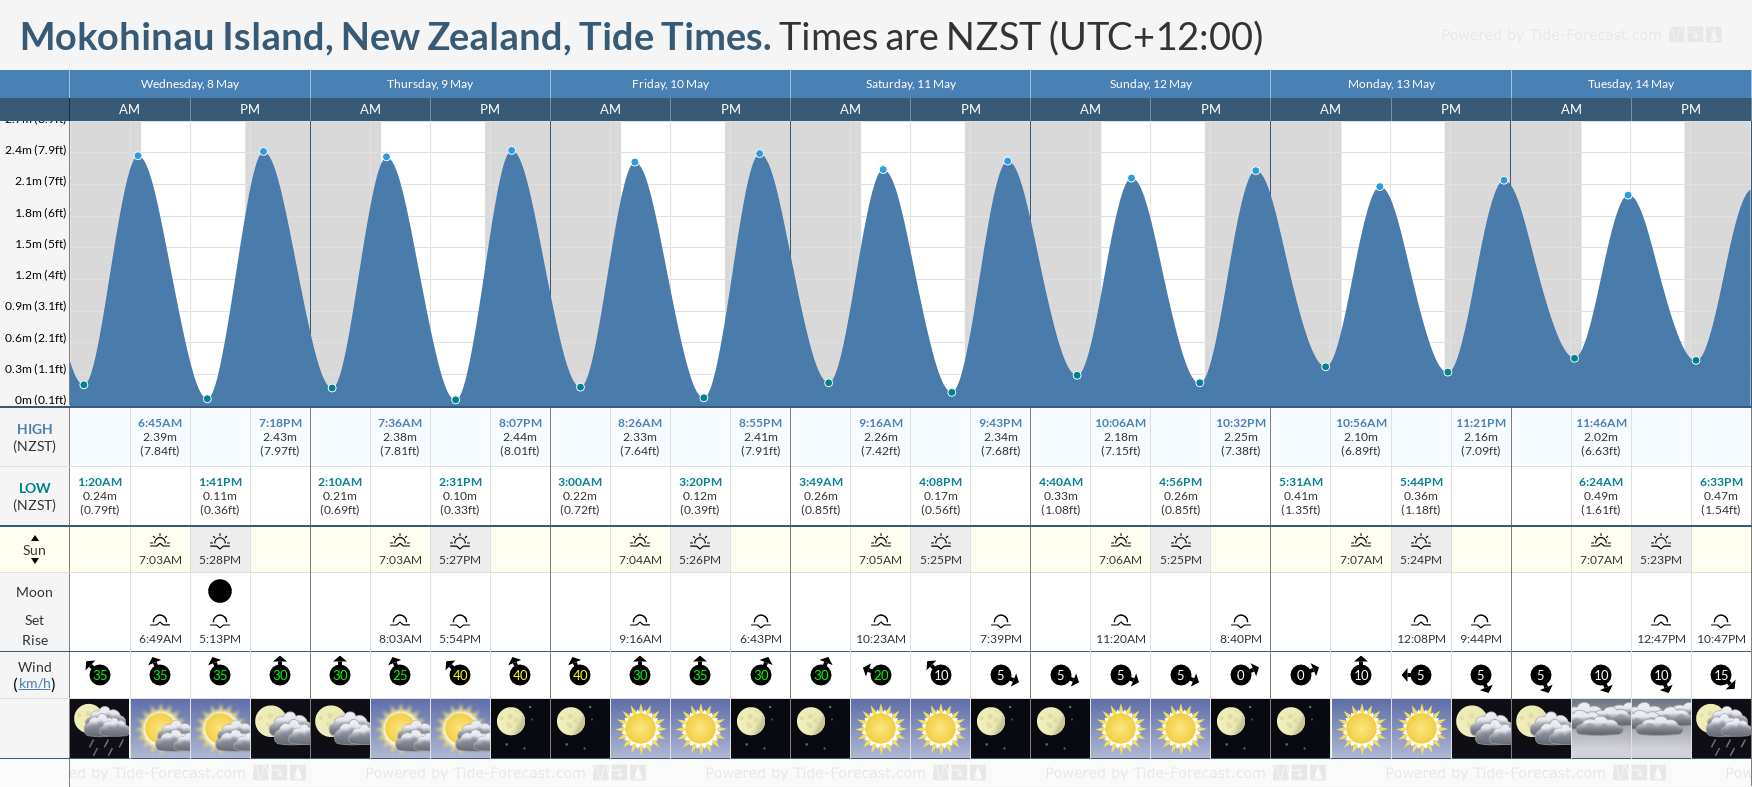 Mokohinau Island, New Zealand Tide Chart including high and low tide tide times for the next 7 days